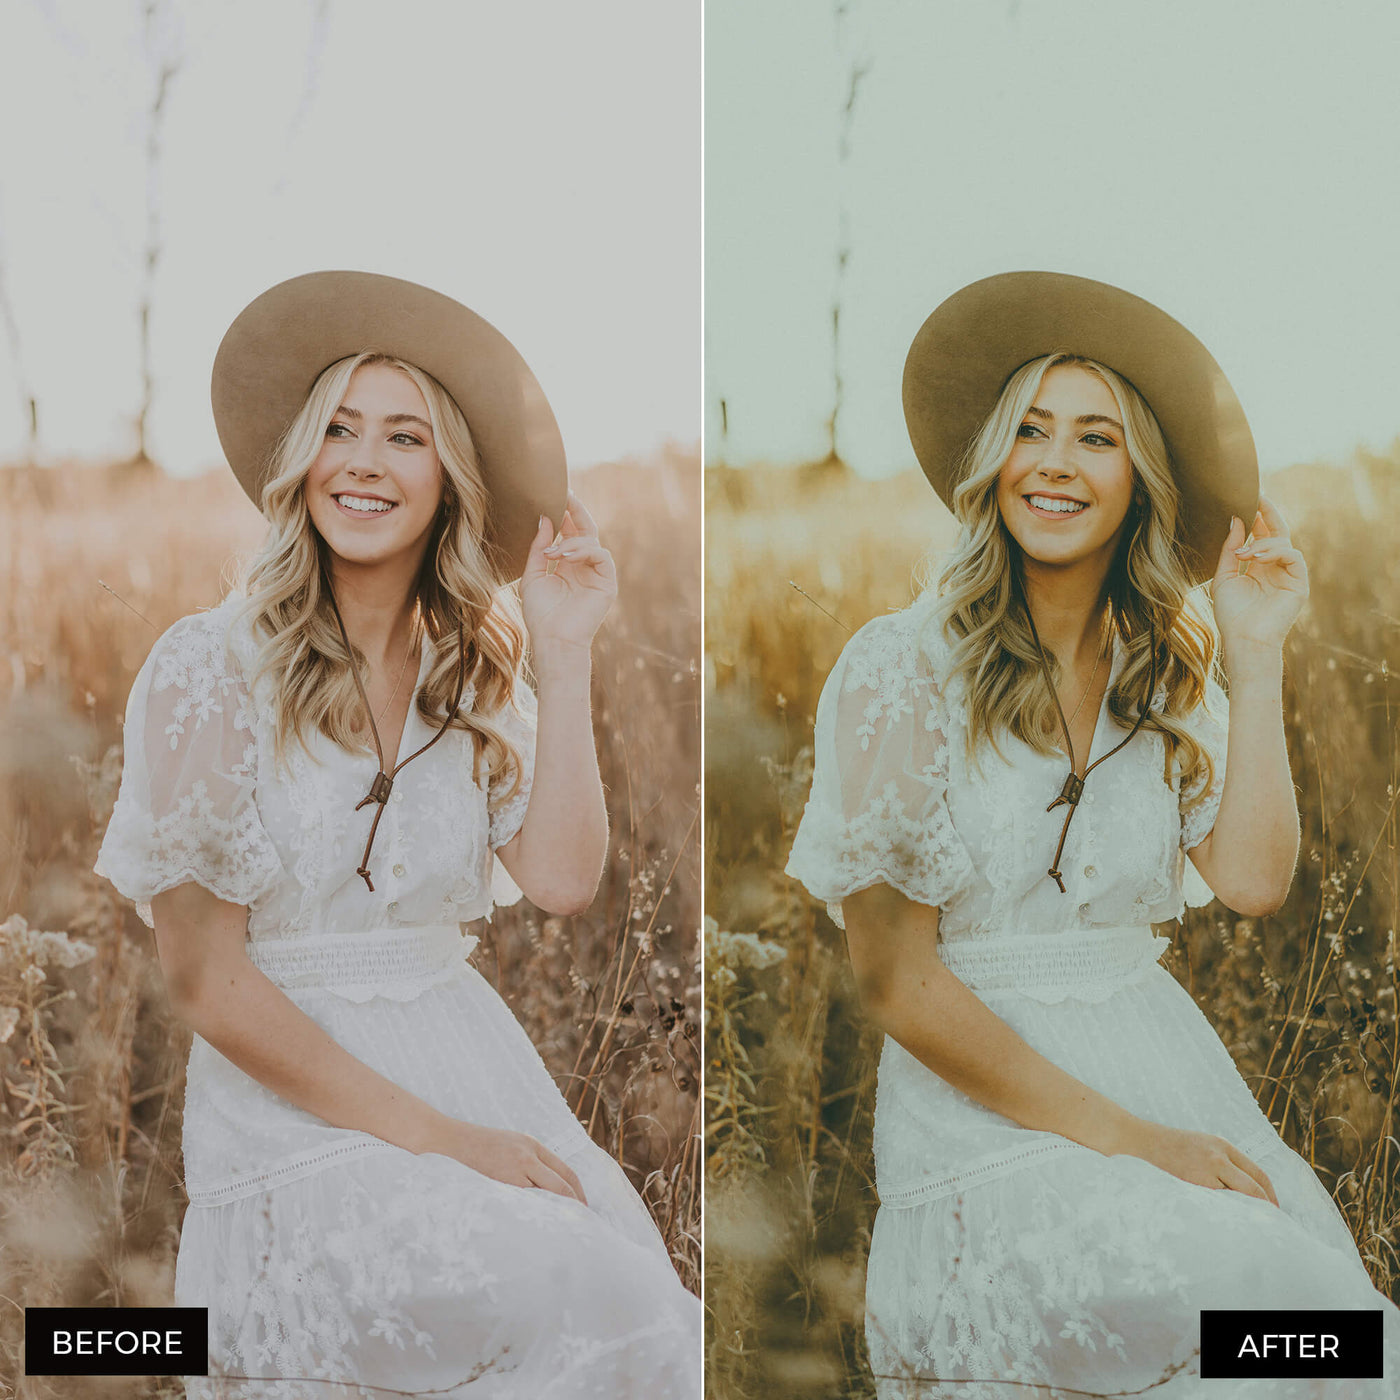 Moody Lifestyle Lightroom Presets Collection